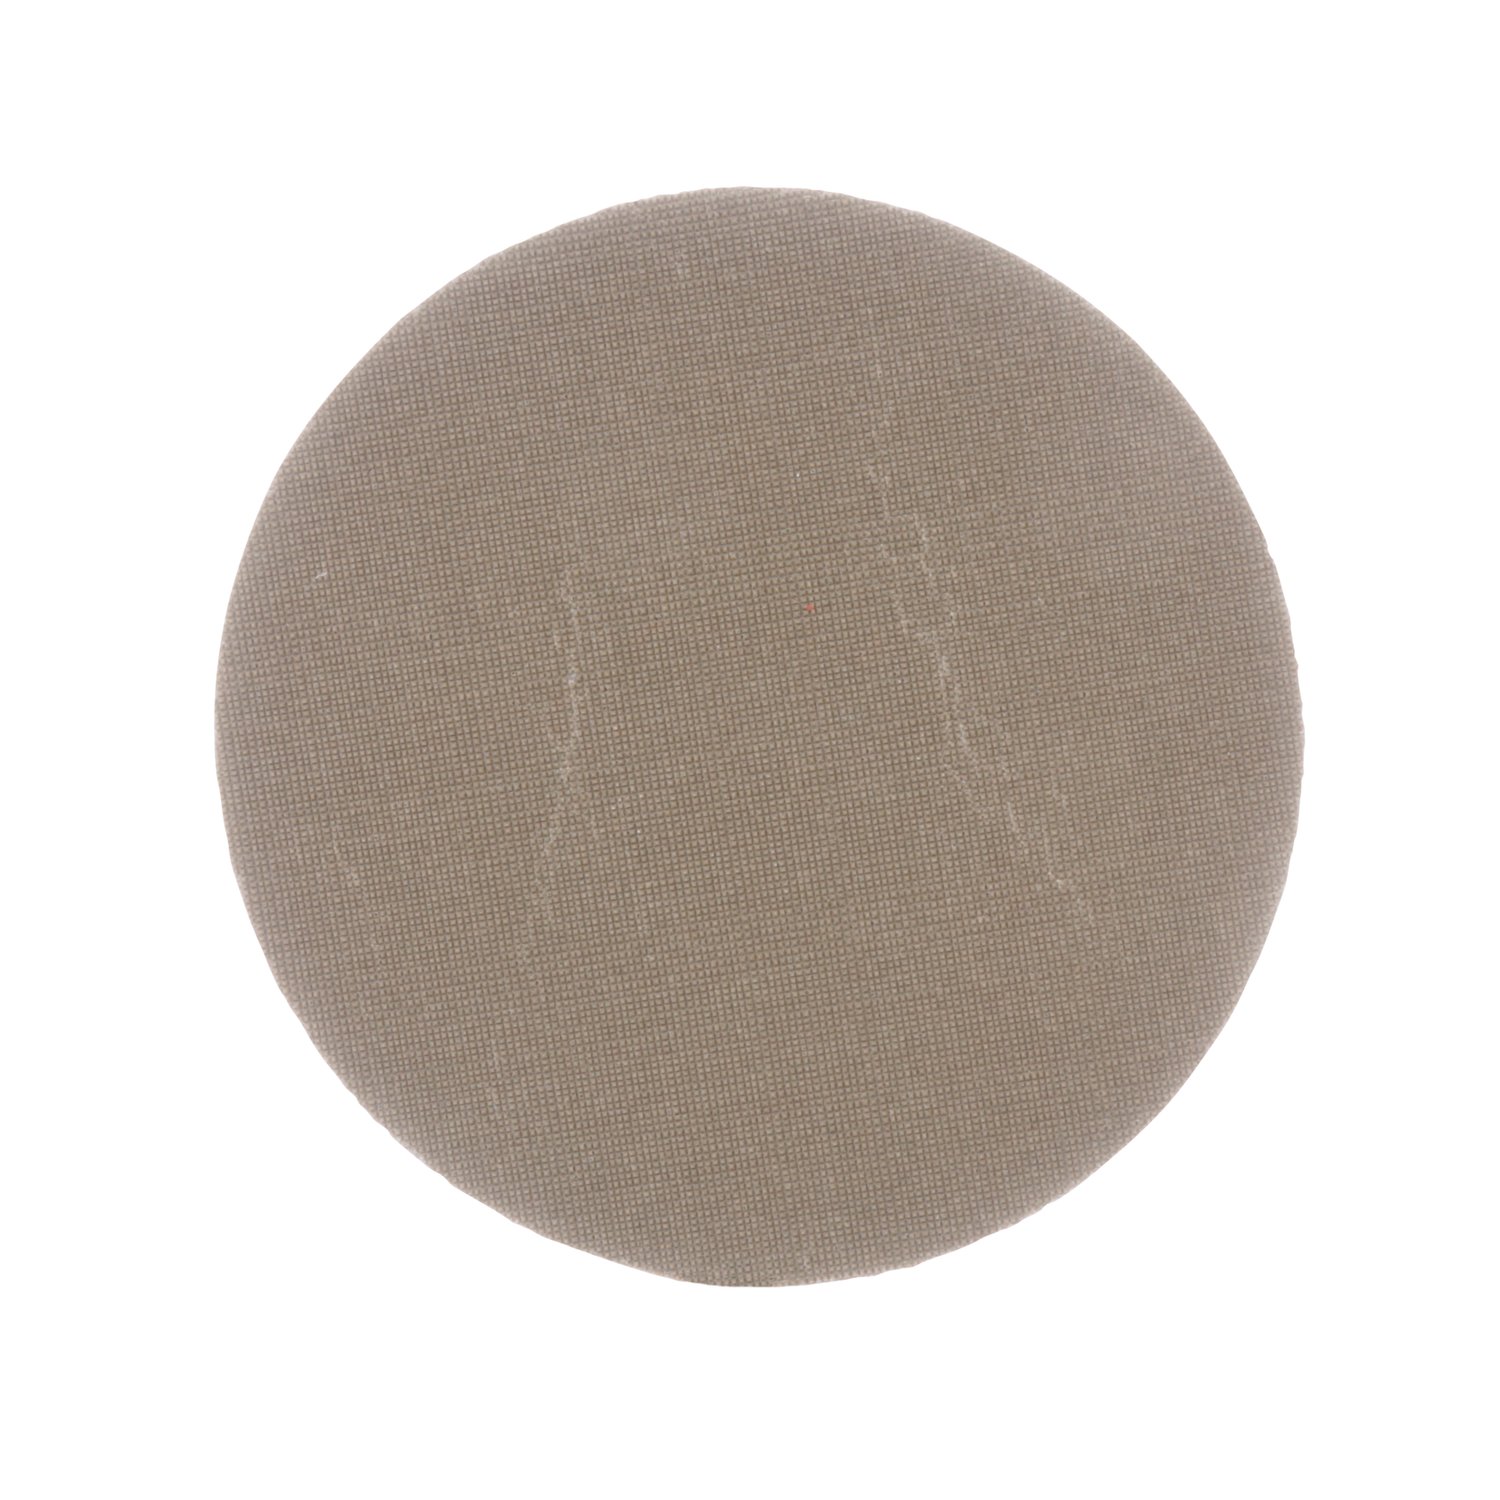 7010518090 - 3M Trizact PSA Cloth Disc 237AA, A30 X-weight, 2-1/2 in x NH, Die
250BB